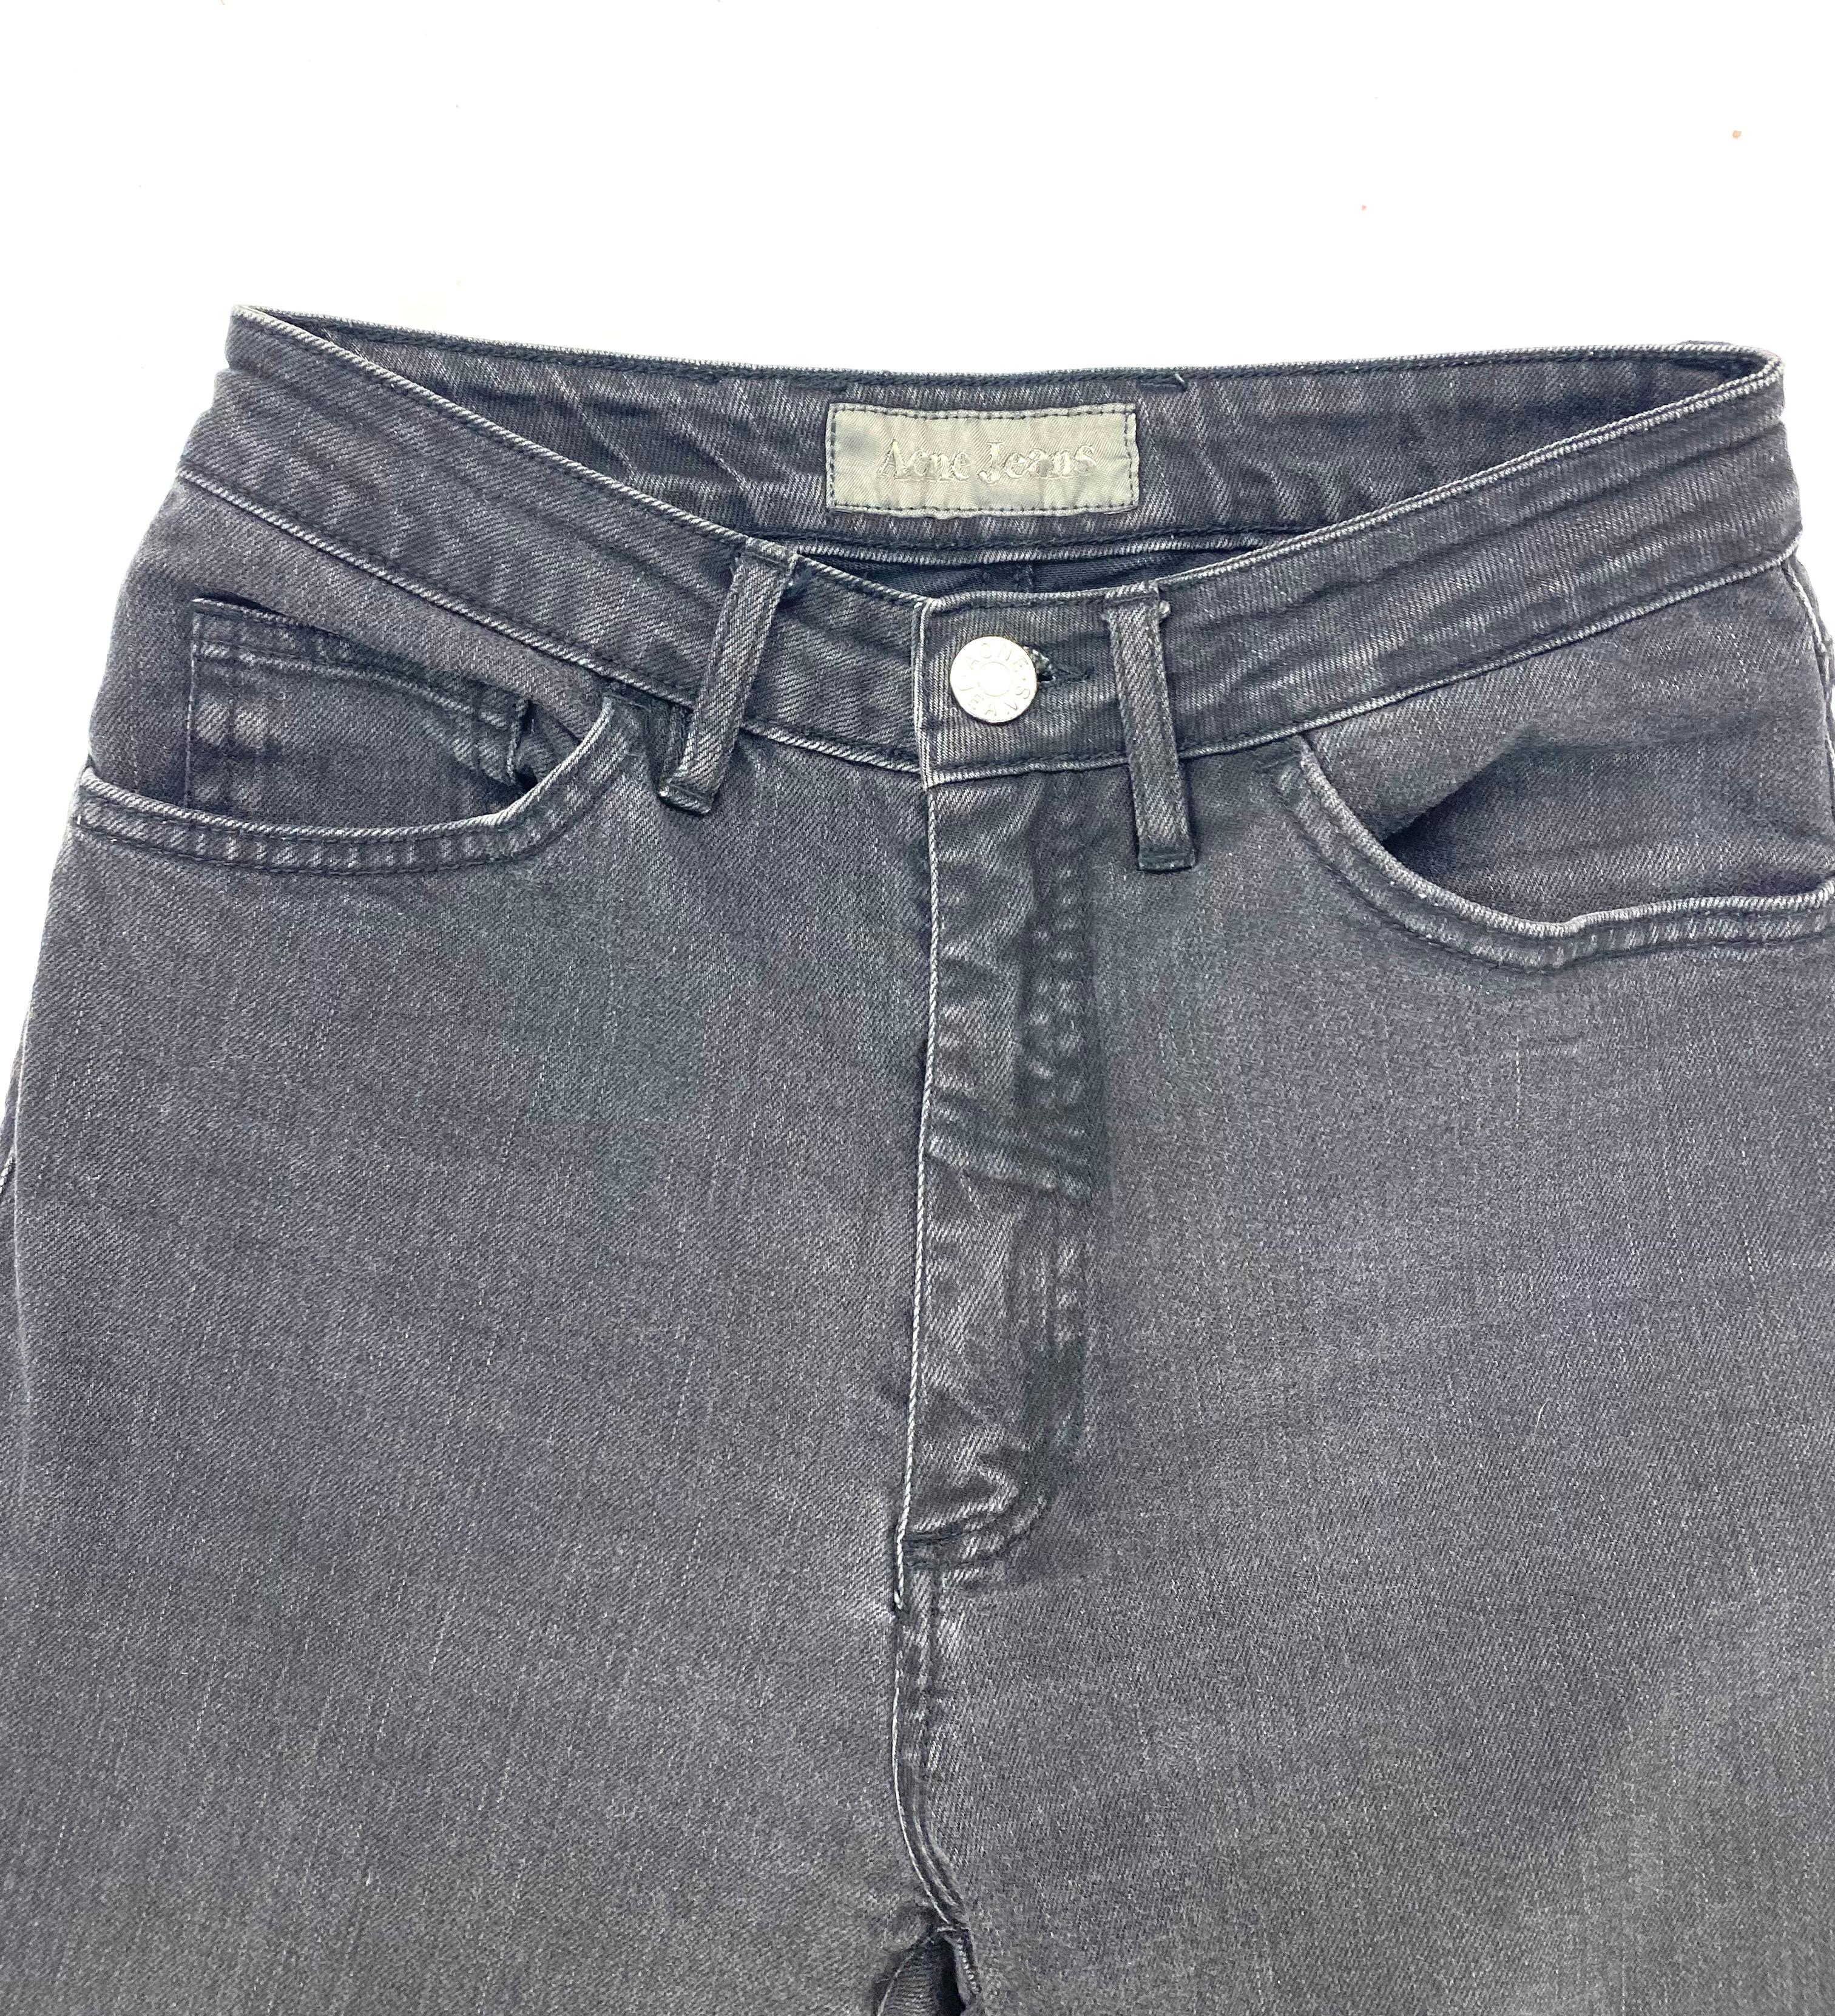 Product details:

The jeans feature grey wash, skinny fit, mid waisted, five pockets style.